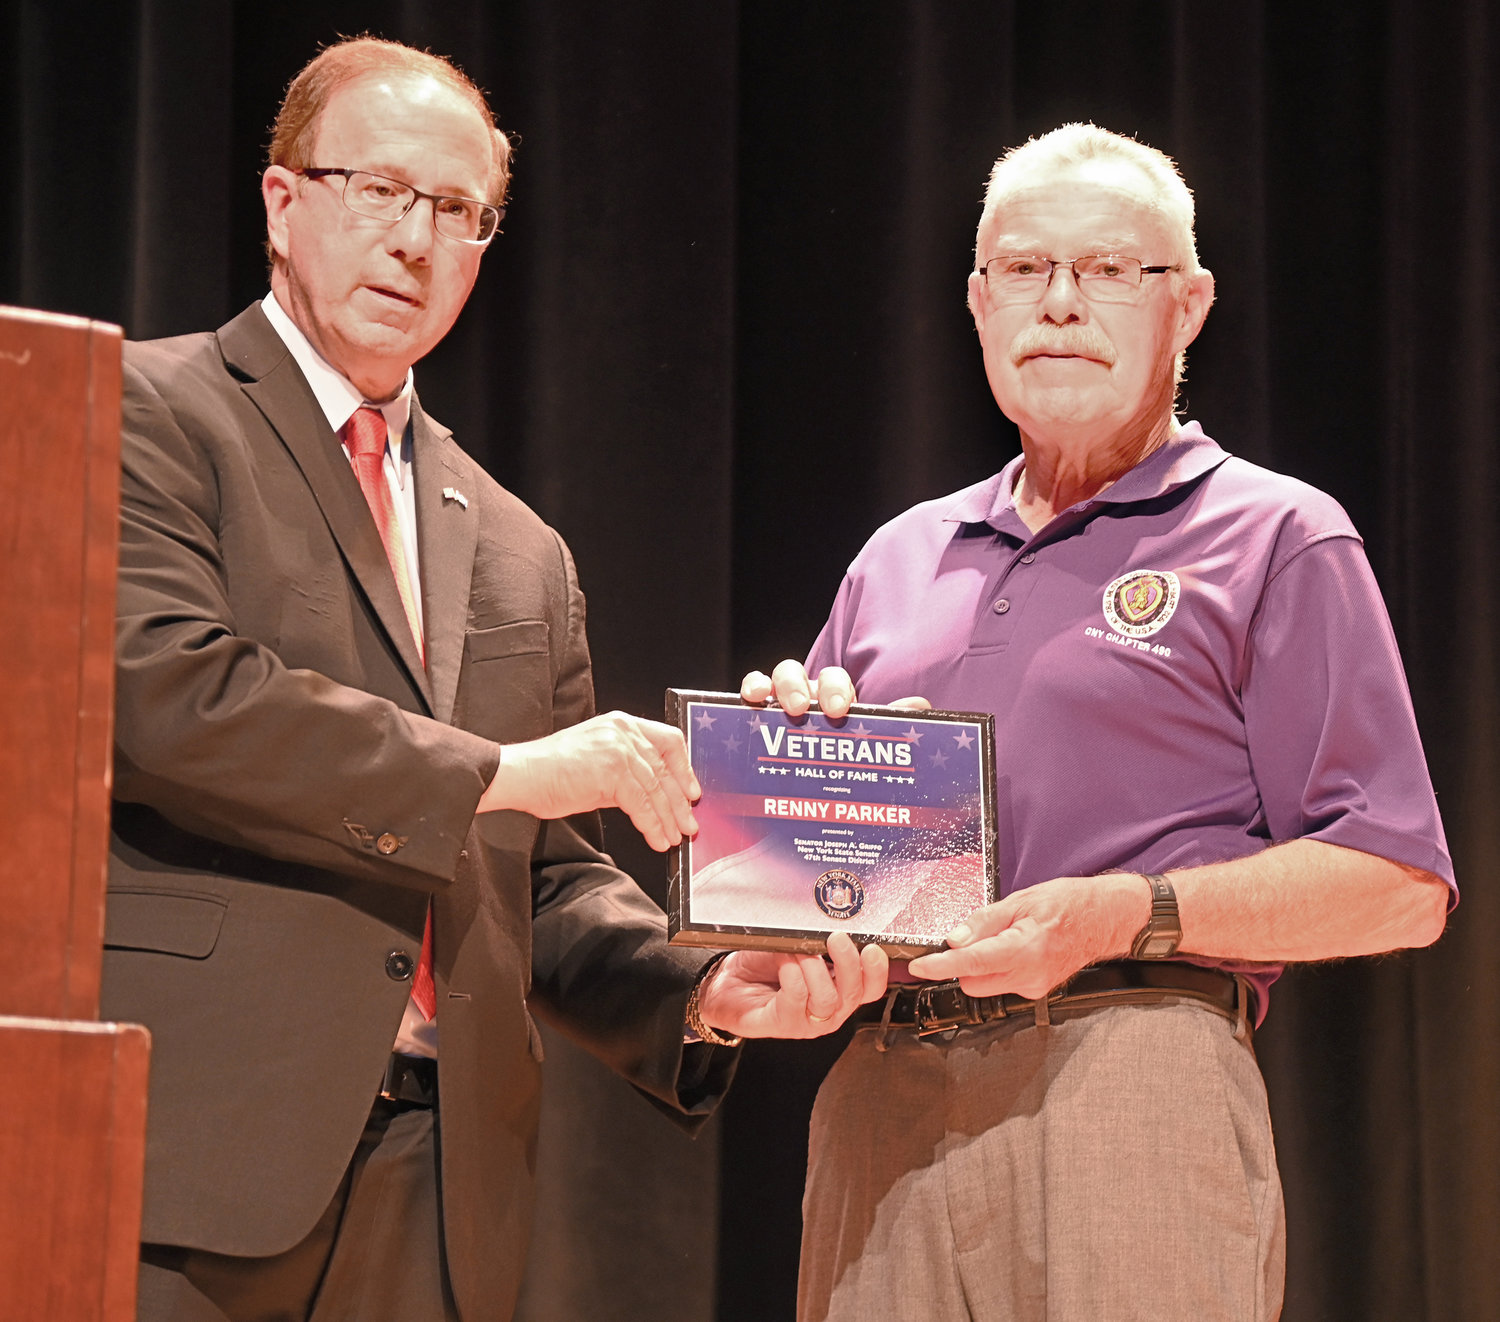 Renny Parker, right, accepts a plaque to designate his induction into the New York State Senate Veterans Hall of Fame from Sen. Joseph A. Griffo during a ceremony on Wednesday.